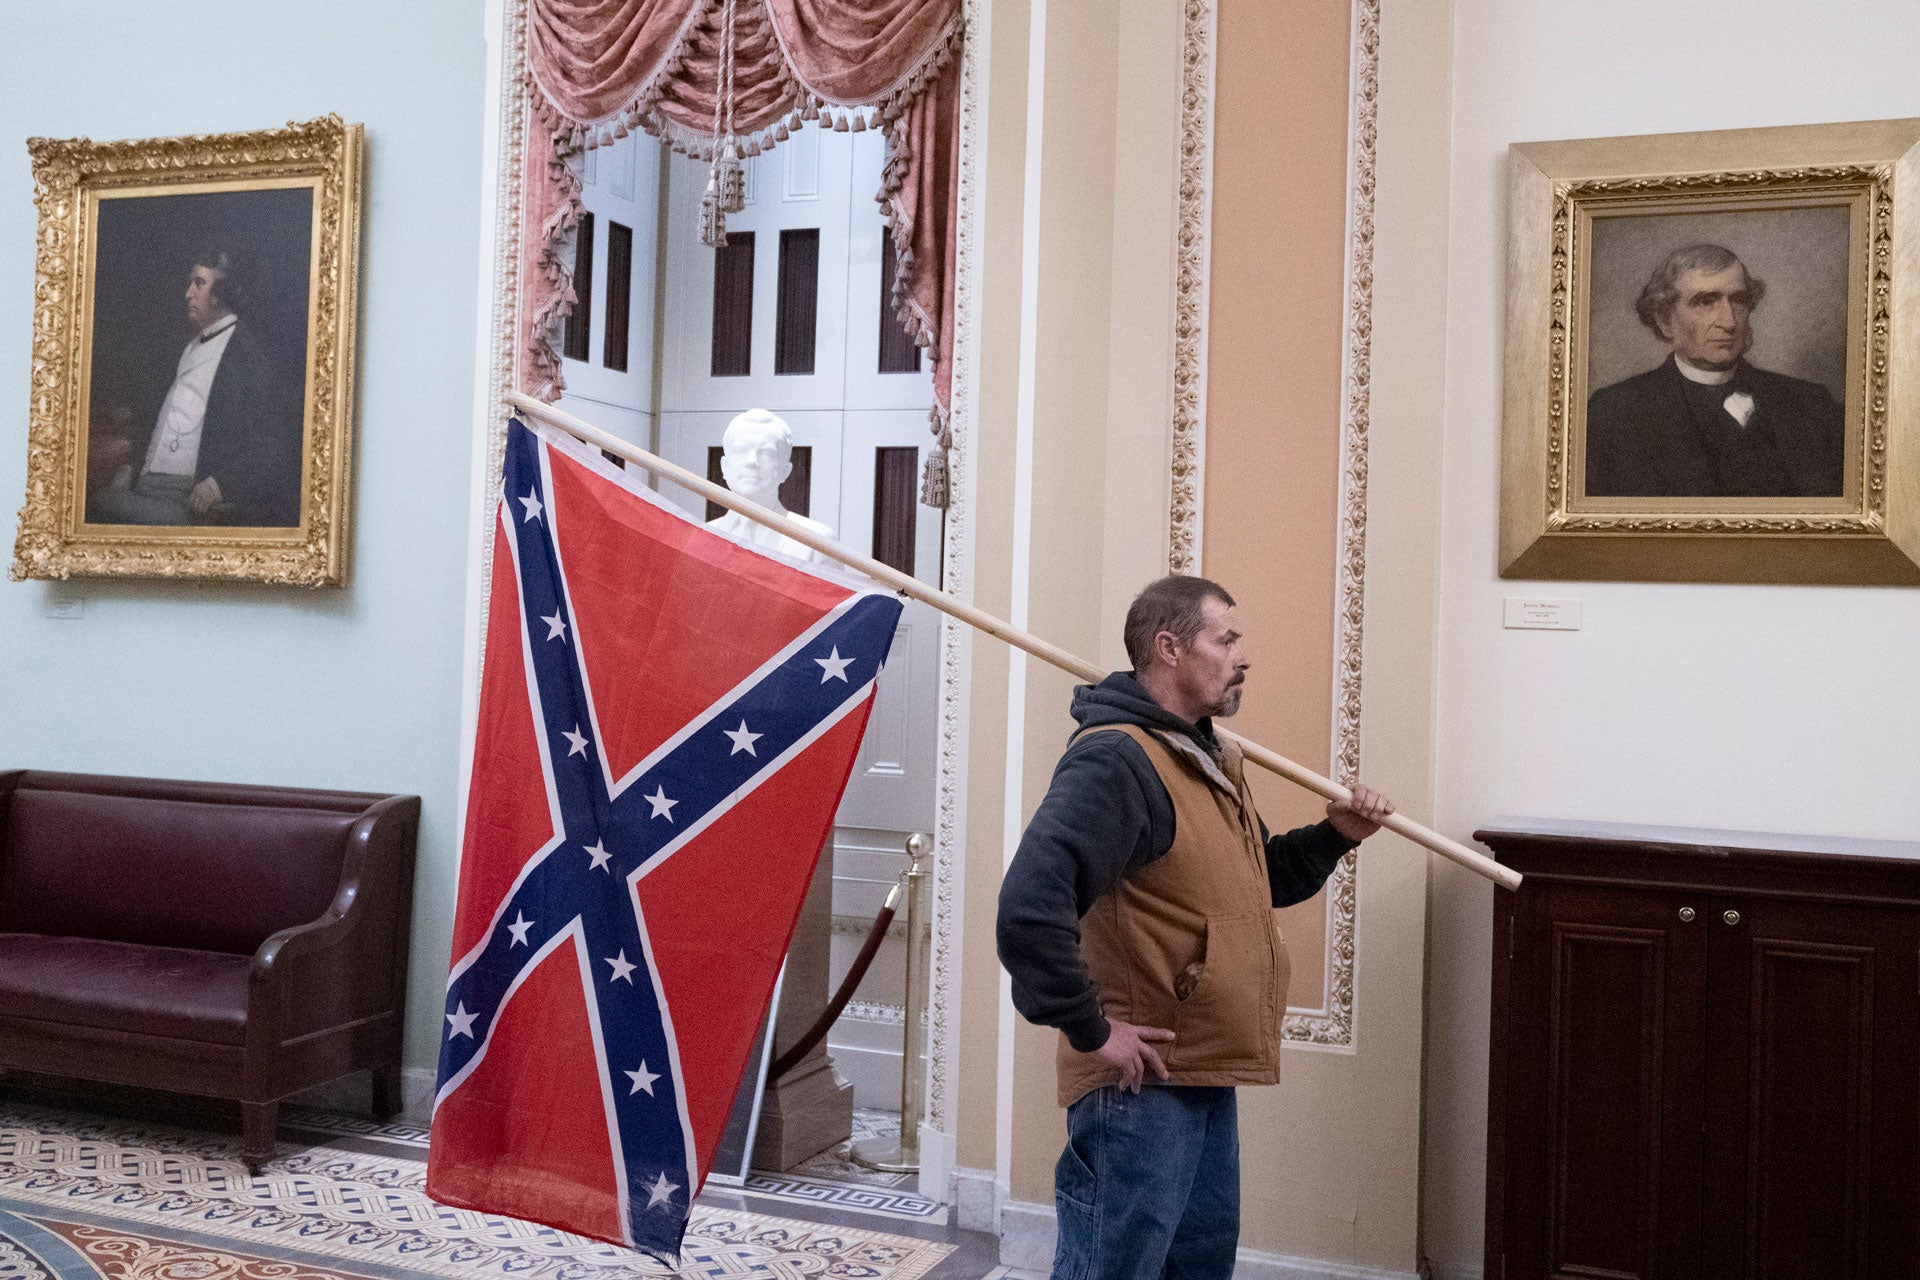 A protester stands with a Confederate flag after storming the Capitol during a Joint Session of Congress in which members were to certify the 2020 Presidential election on January 6, 2021.